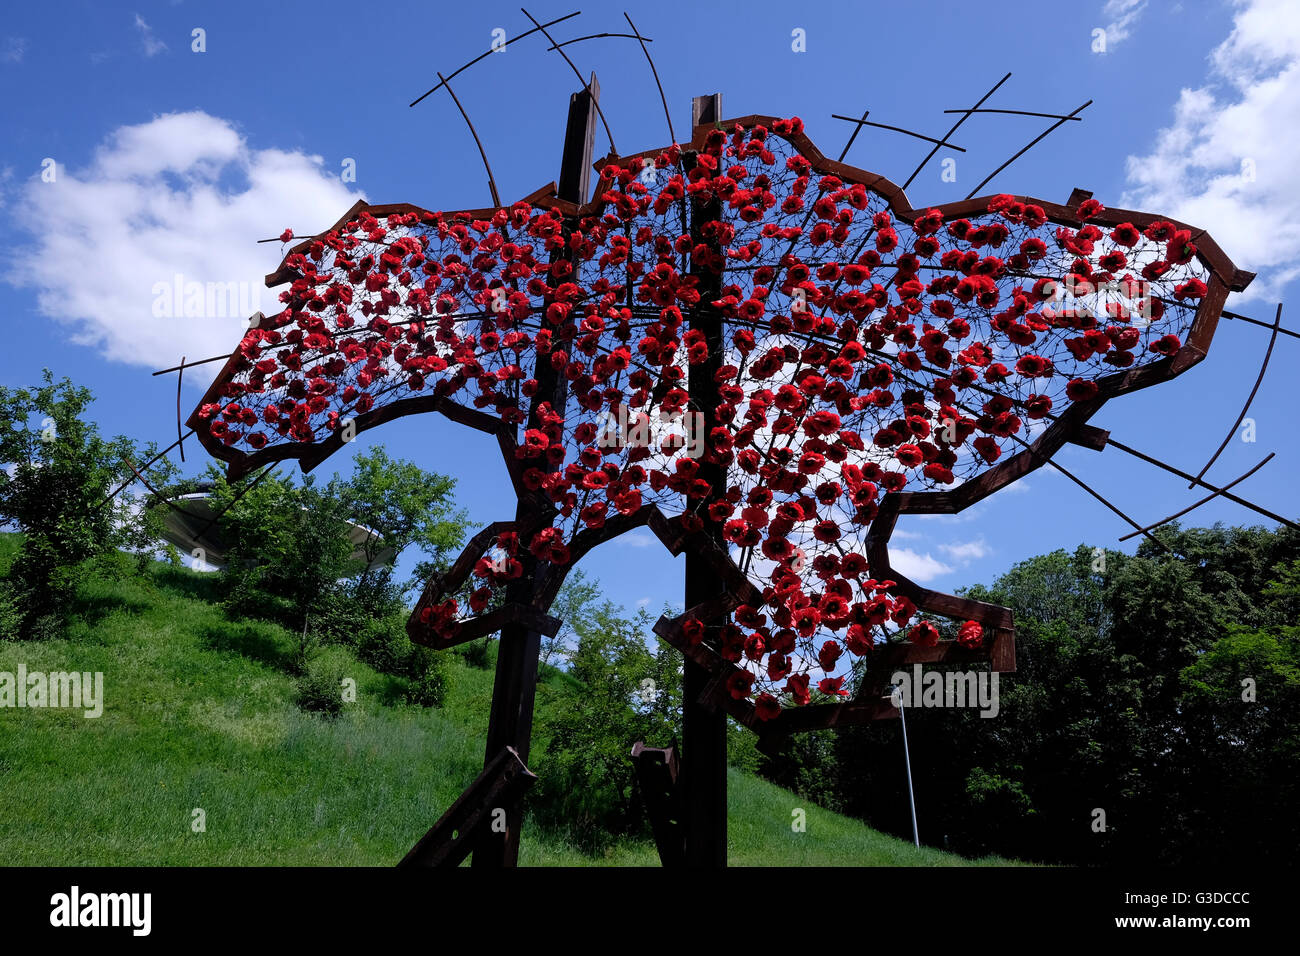 A symbolic map of Ukraine constructed with red poppies displayed in the garden at the complex of the National Museum of the History of Ukraine in the Second World War also called The Ukrainian State Museum of the Great Patriotic War located in the outskirts of the Pechersk district of Kiev, the capital of Ukraine Stock Photo